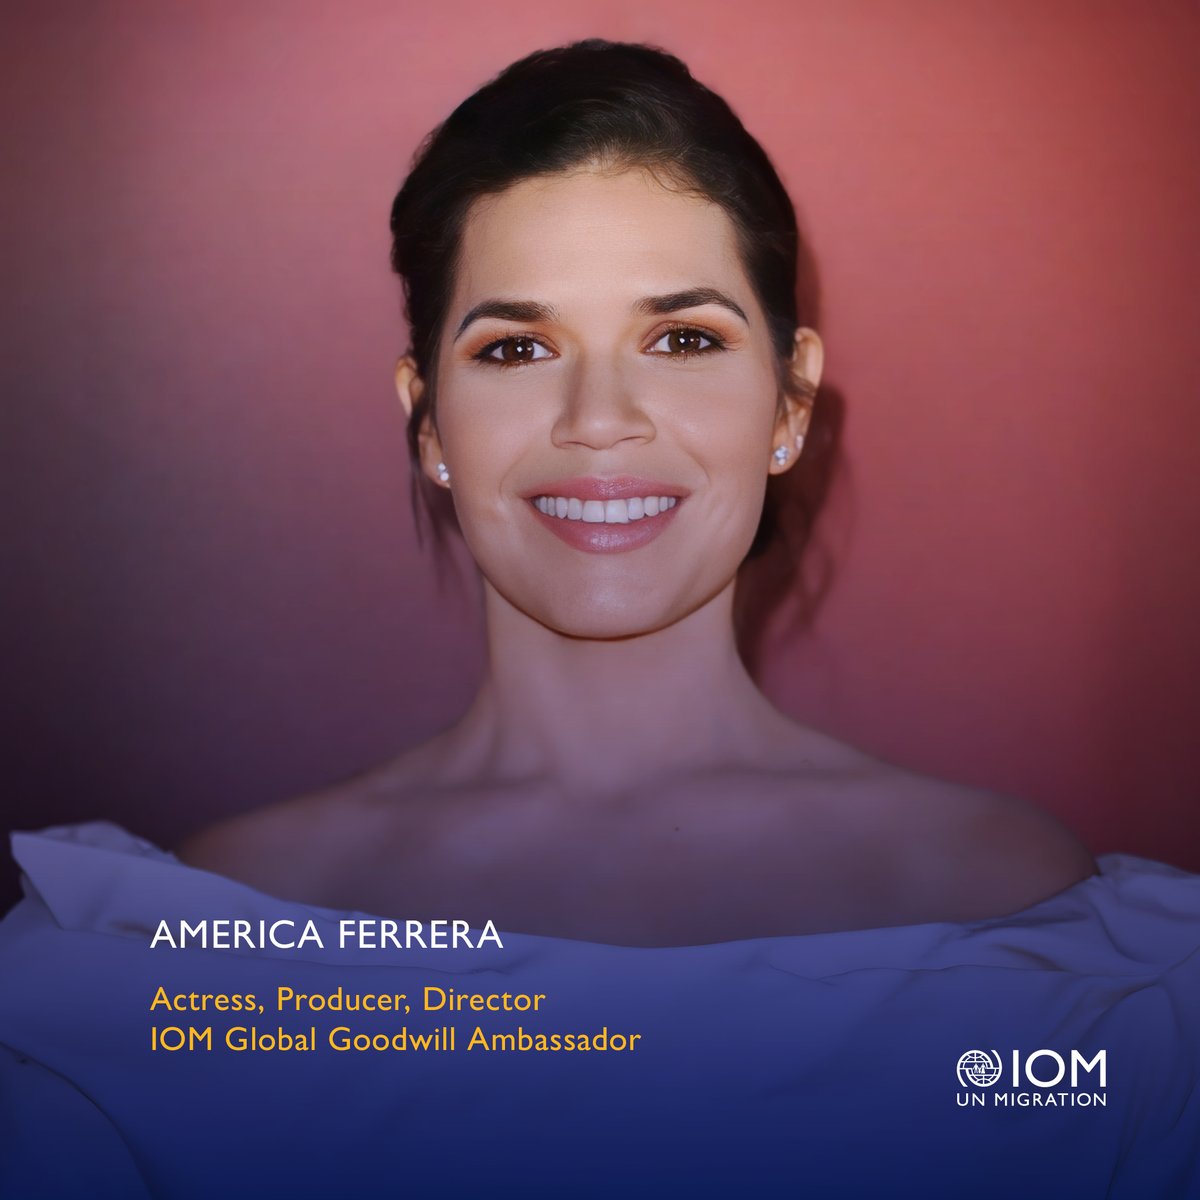 IOM is thrilled to welcome America Ferrera as the new Global Goodwill Ambassador! She has been an advocate for the rights of migrants, especially women & girls. Having a migrant history herself, she is determined to continue to amplify migrant voices. iom.int/Z3M